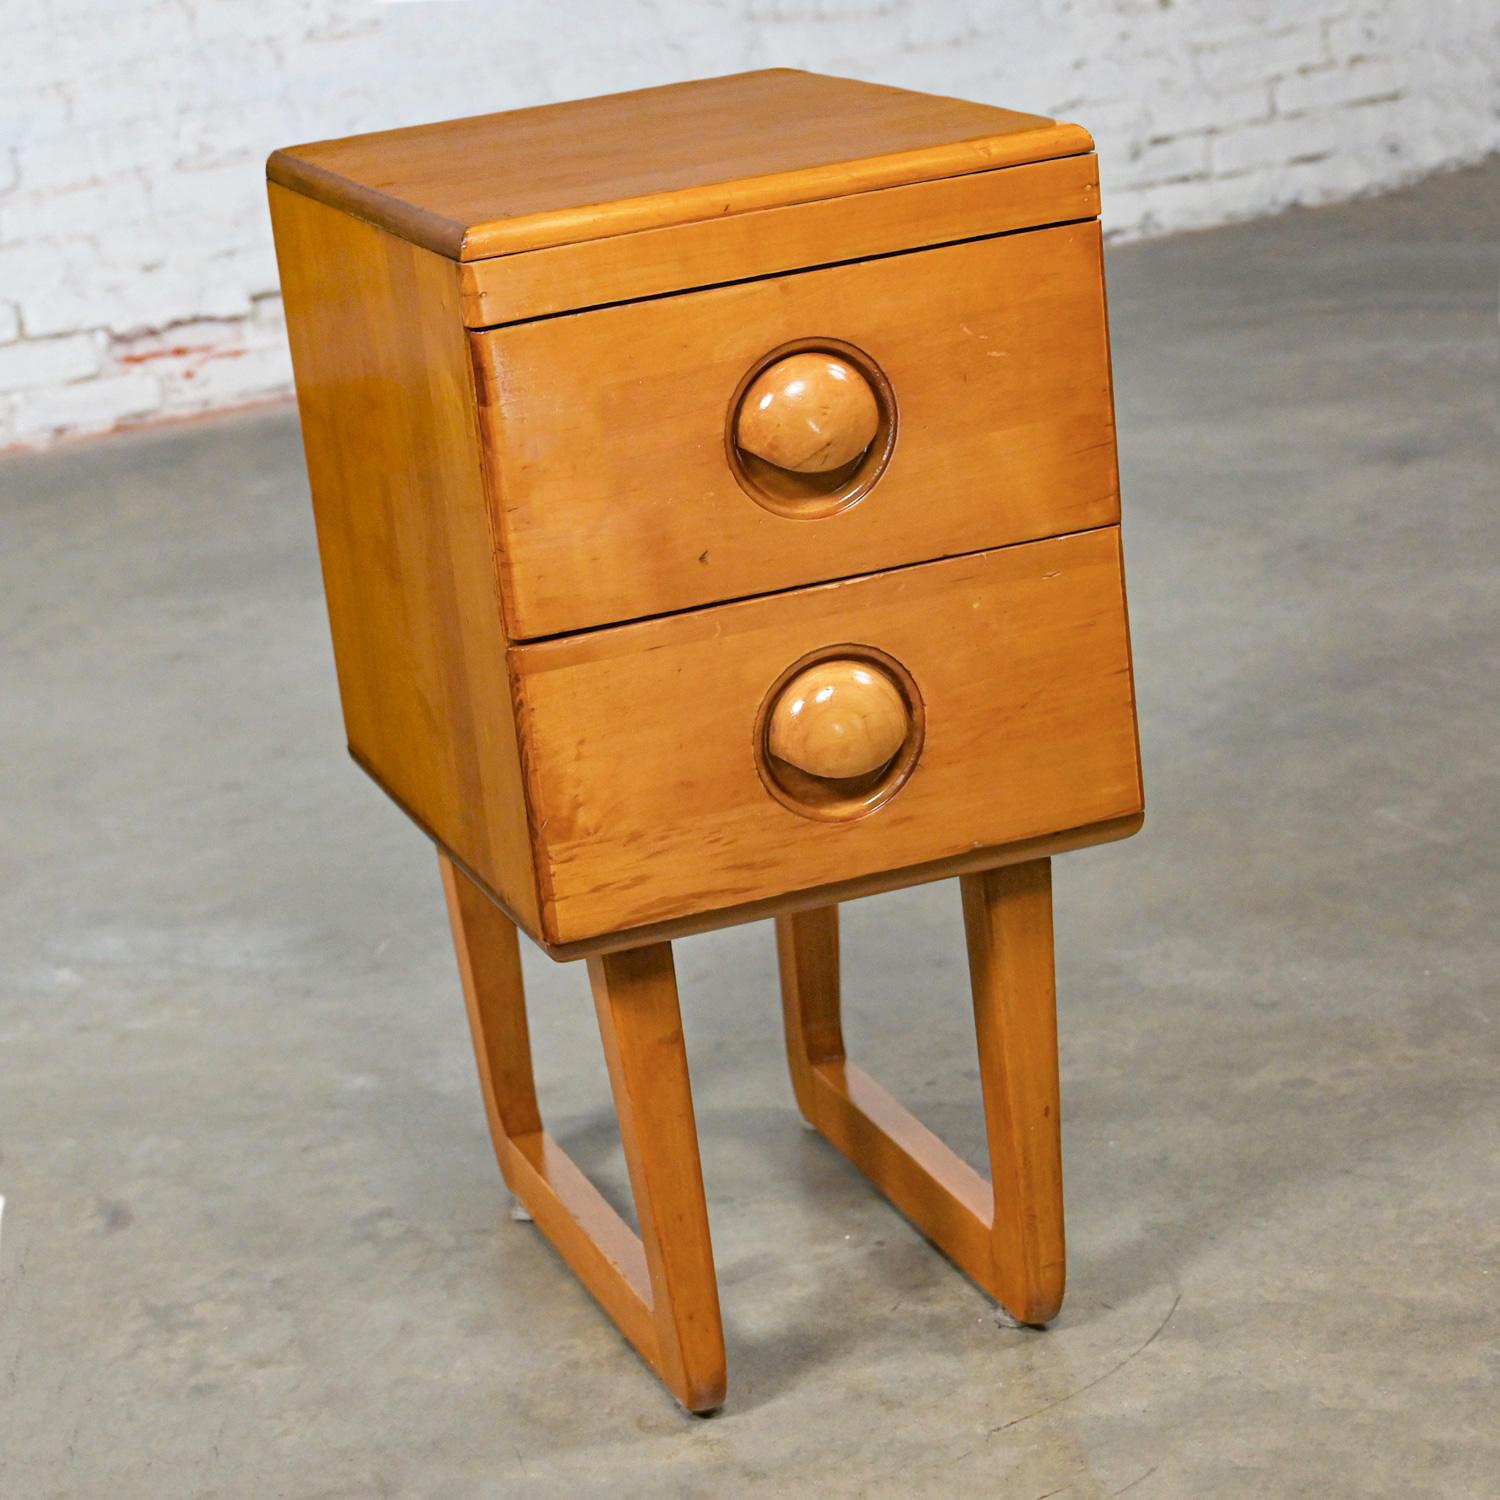 Streamlined Moderne Early to Mid-20th Century Art Moderne Maple 2 Drawer Nightstand Style of Bissman For Sale